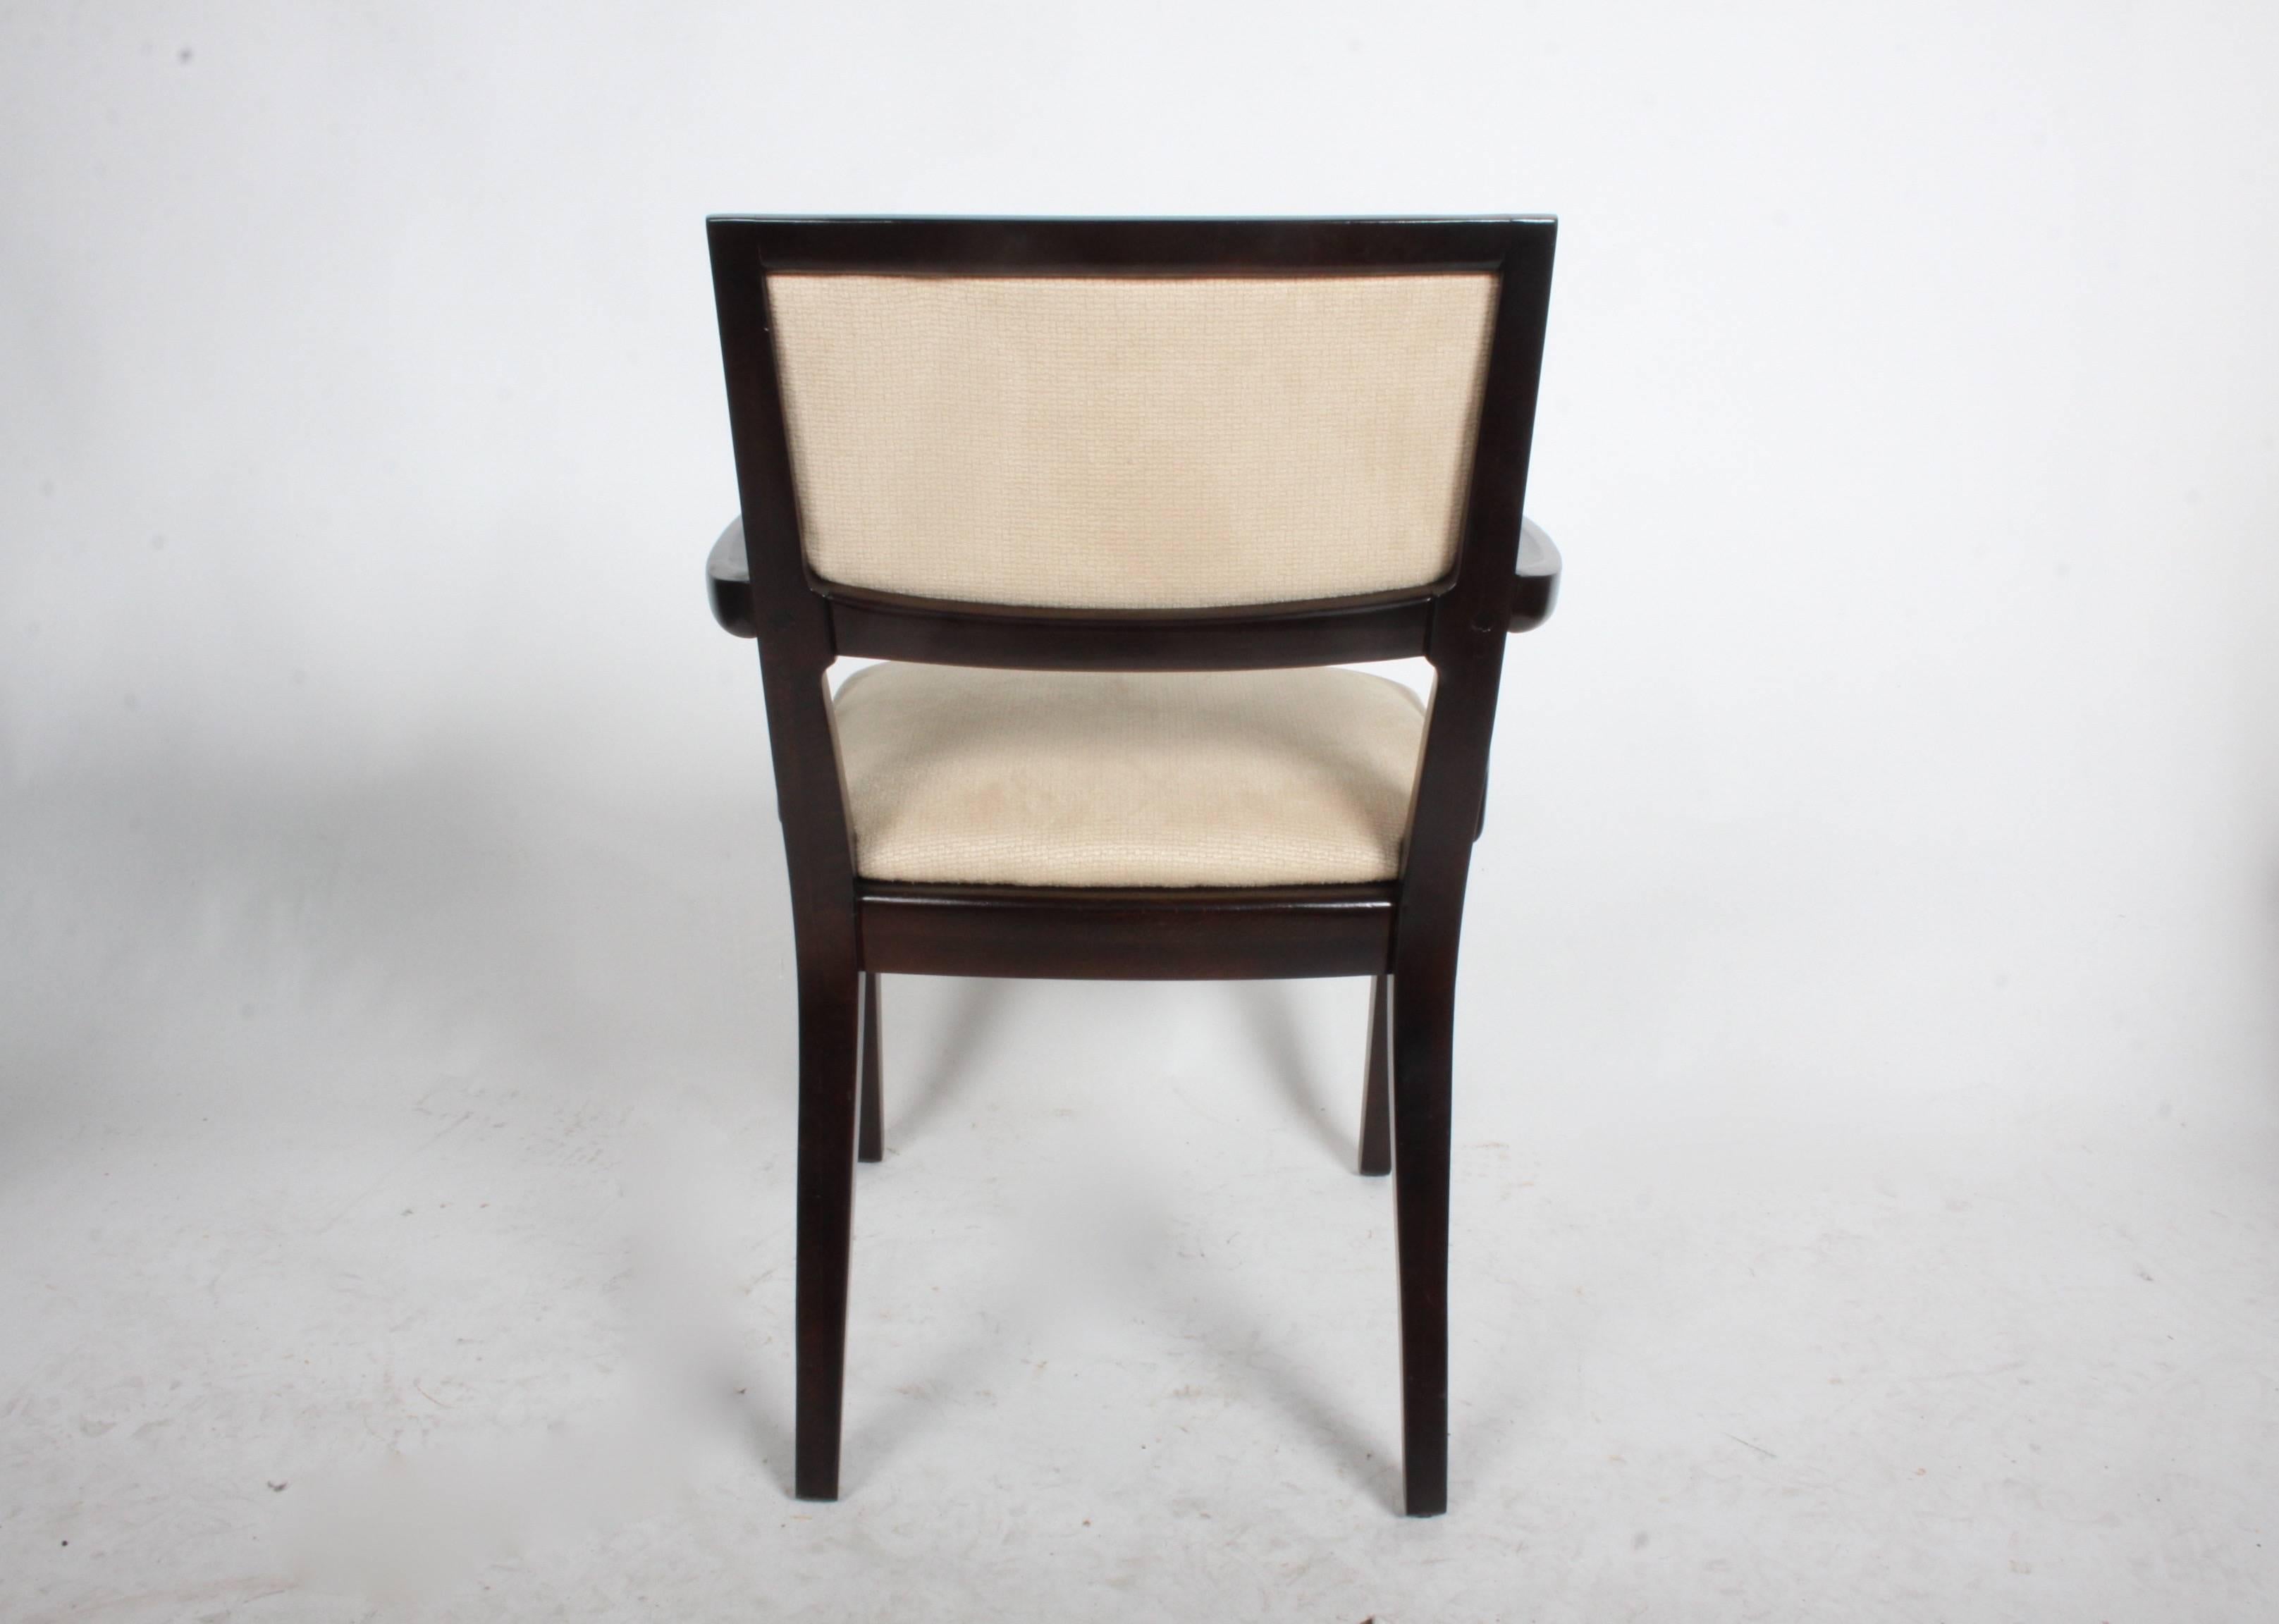 Stained Pair of Edward Wormley for Drexel Arm Chairs - Precedent Collection  For Sale